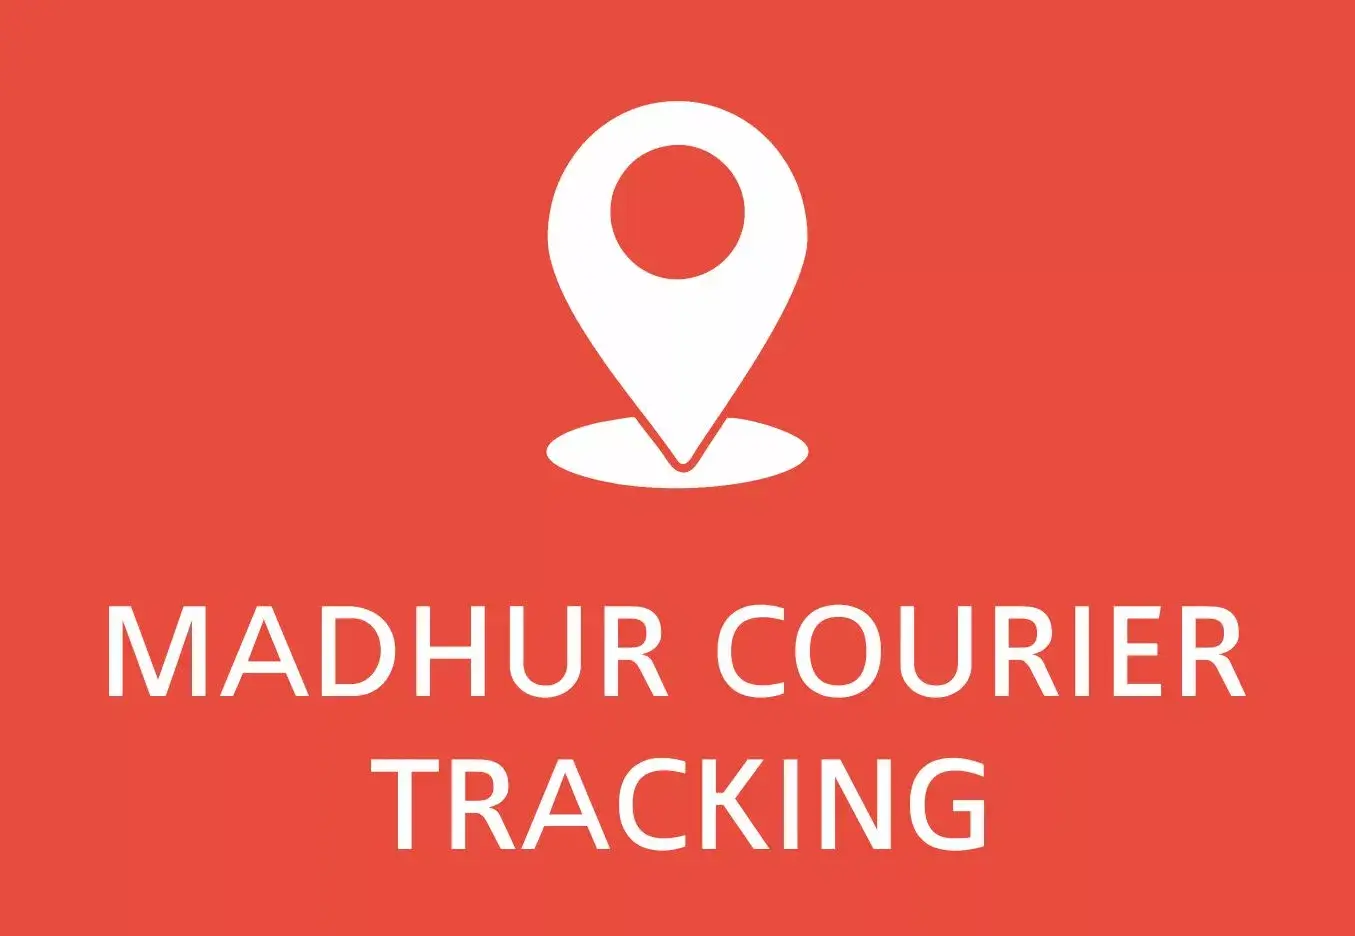 Madhur courier tracking